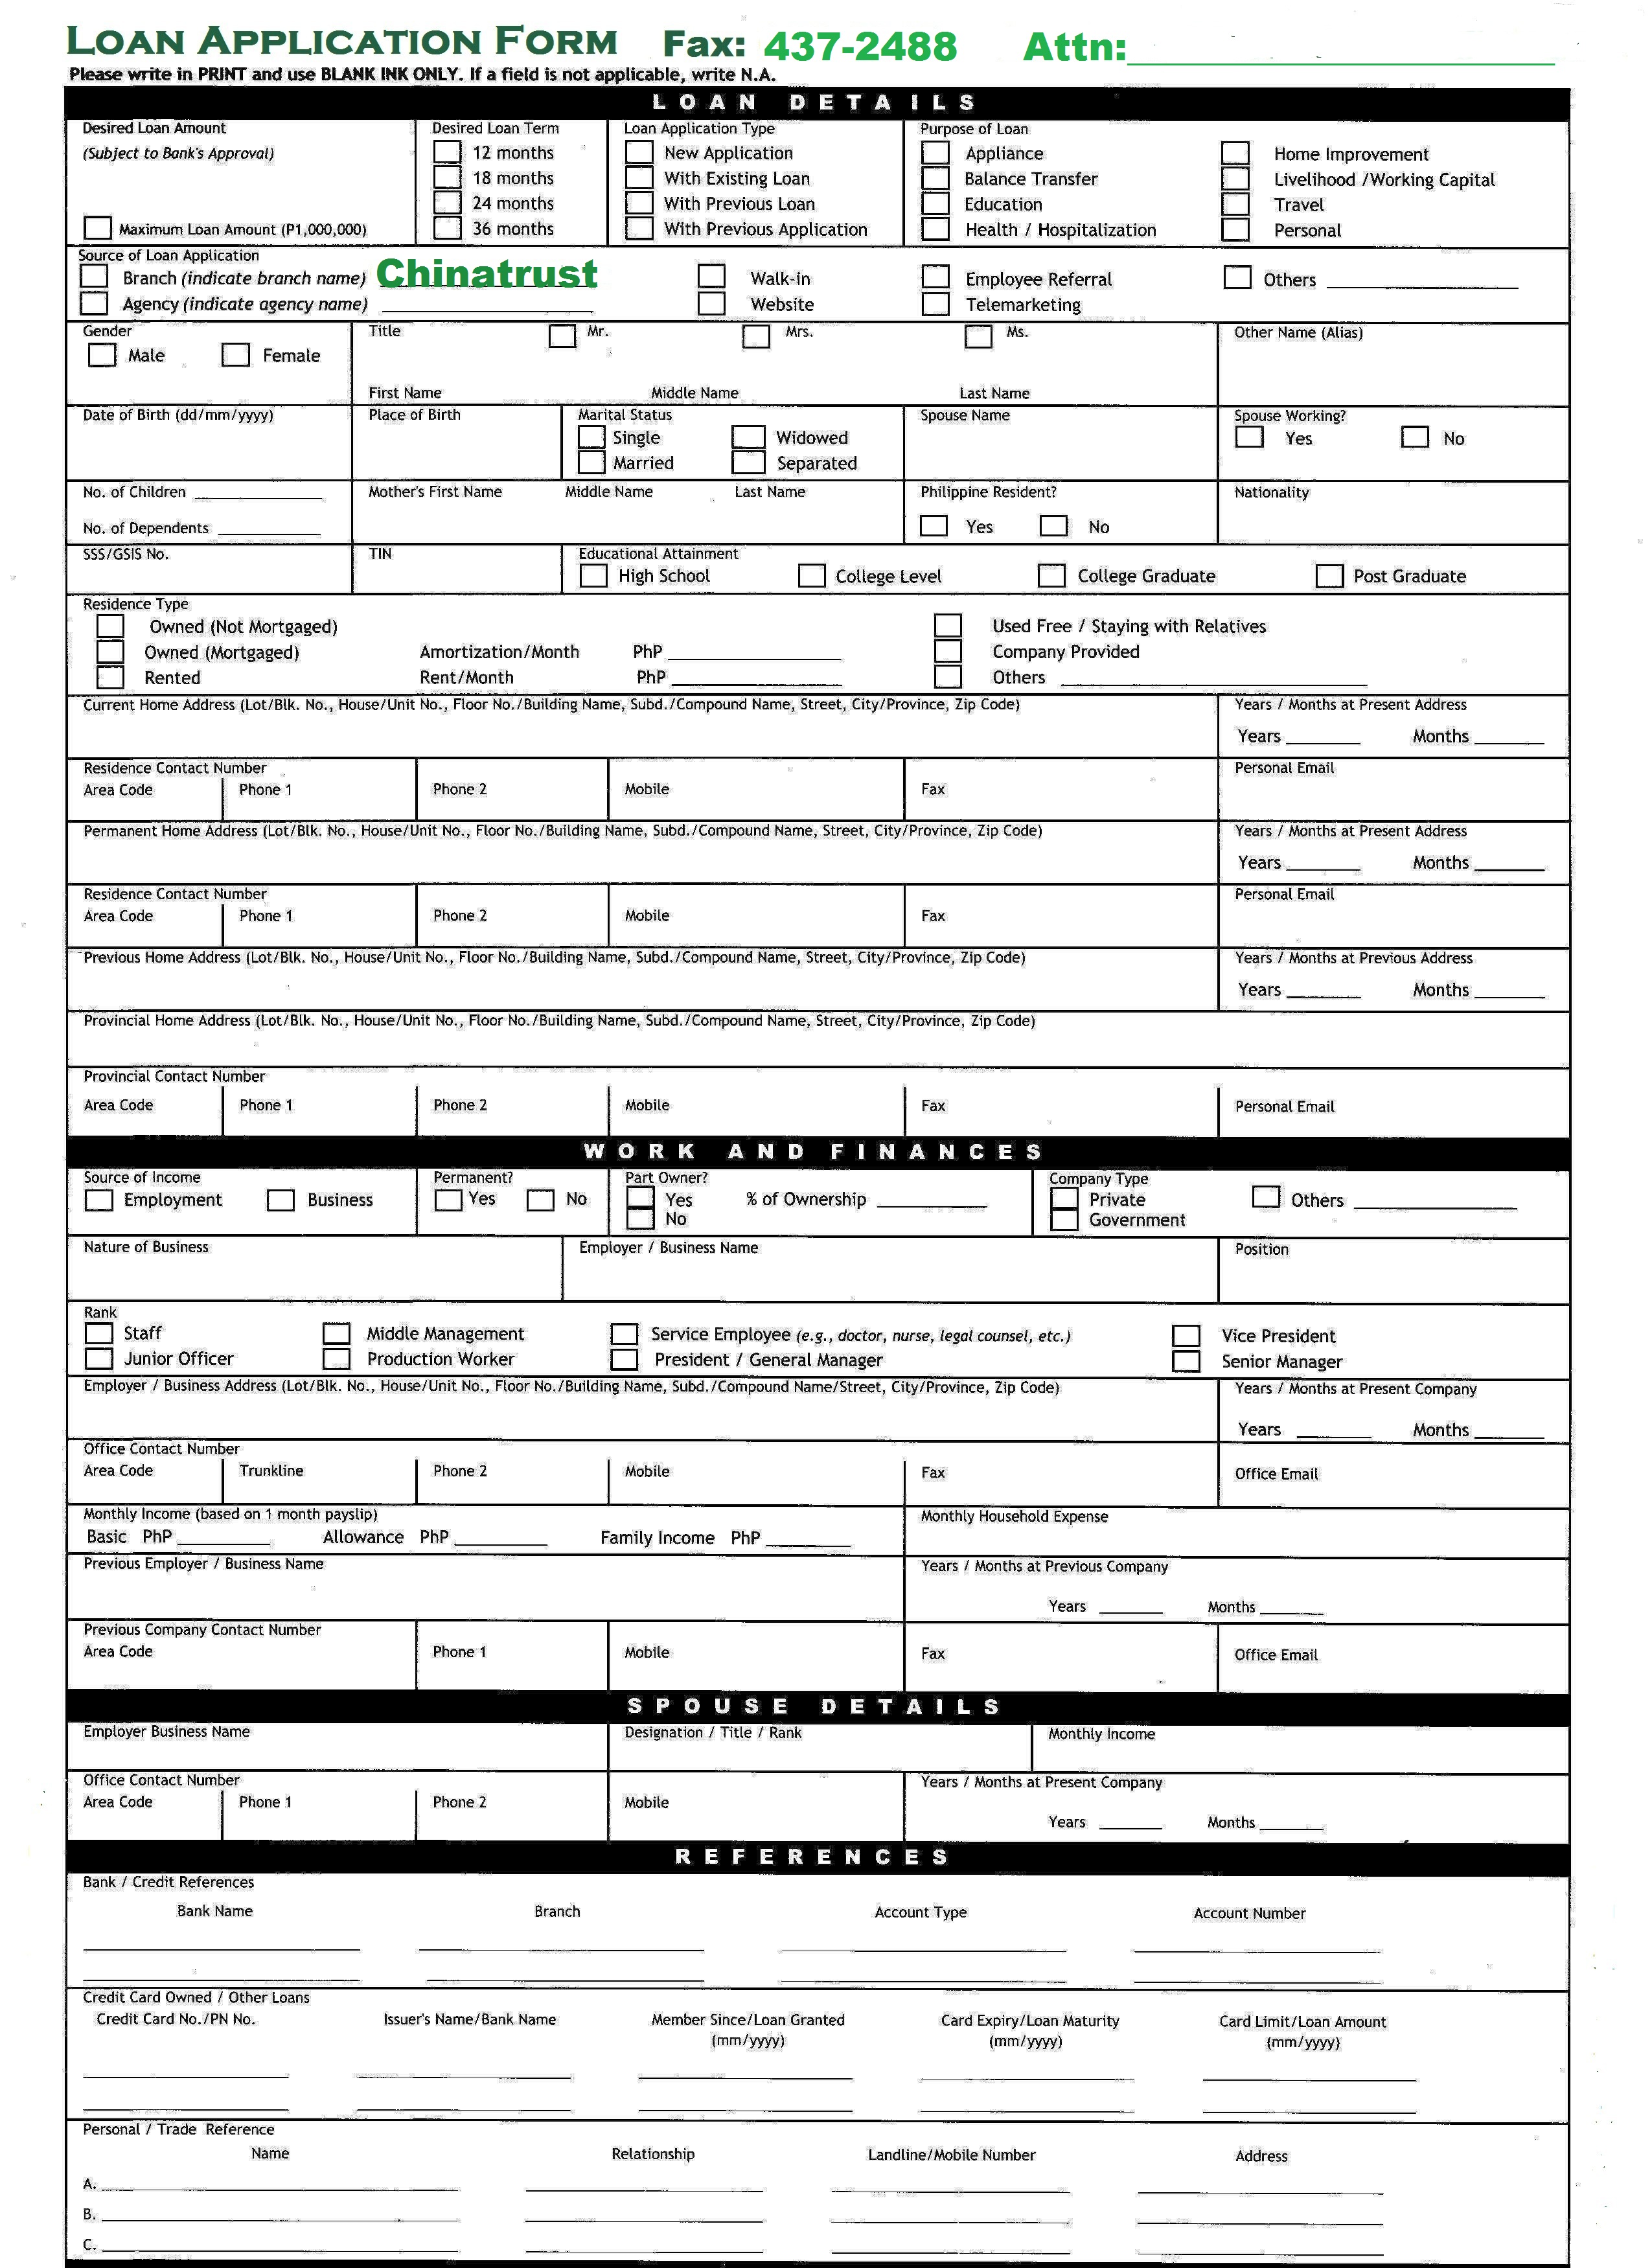 Free personal loan form template